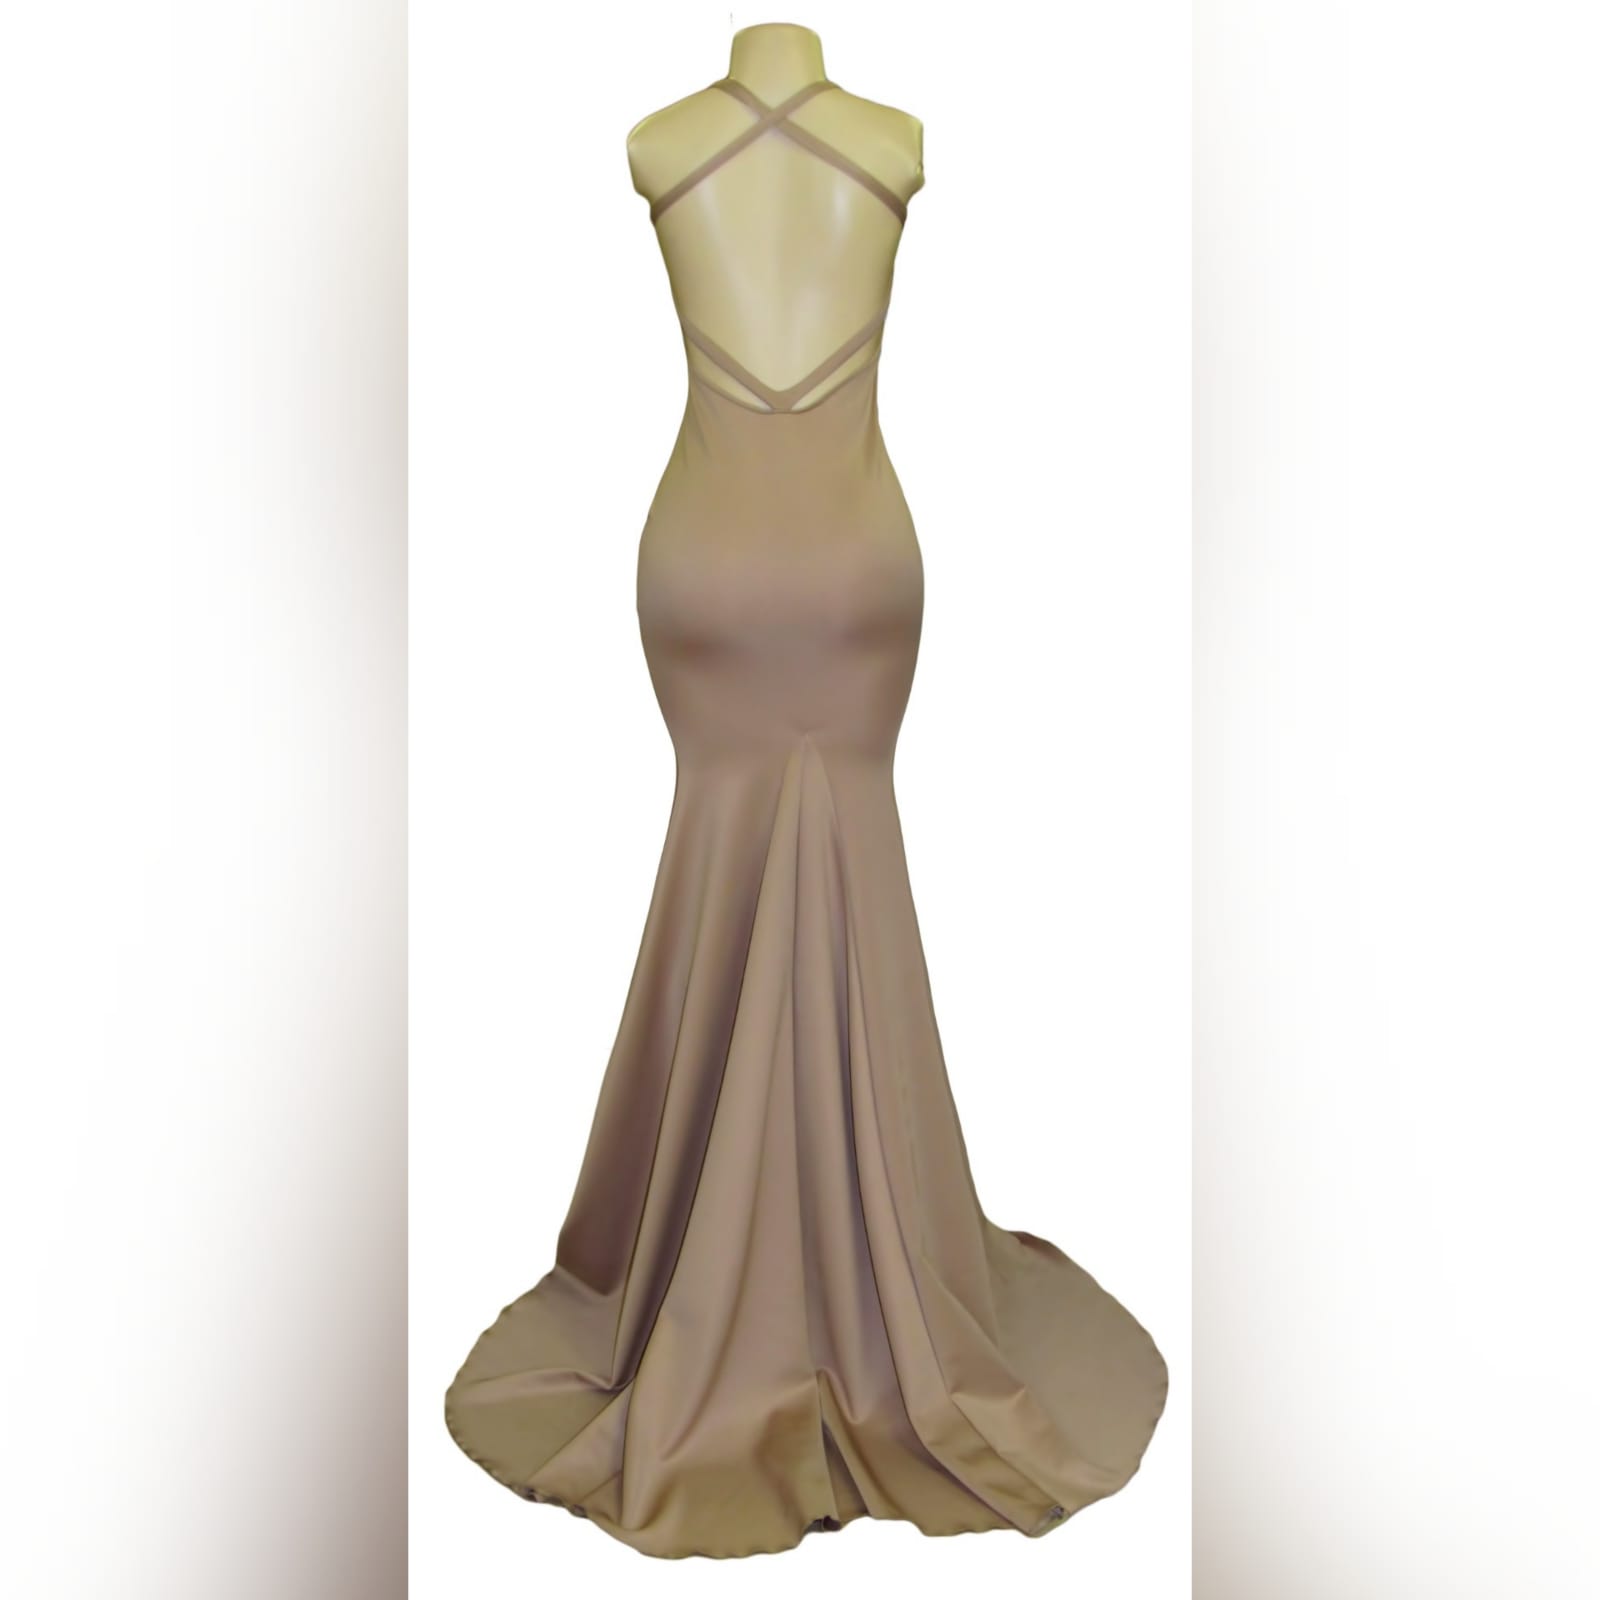 Tan sexy soft mermaid prom dress 5 tan sexy soft mermaid prom dress with a naked back detailed with straps, with a slit and a long train.